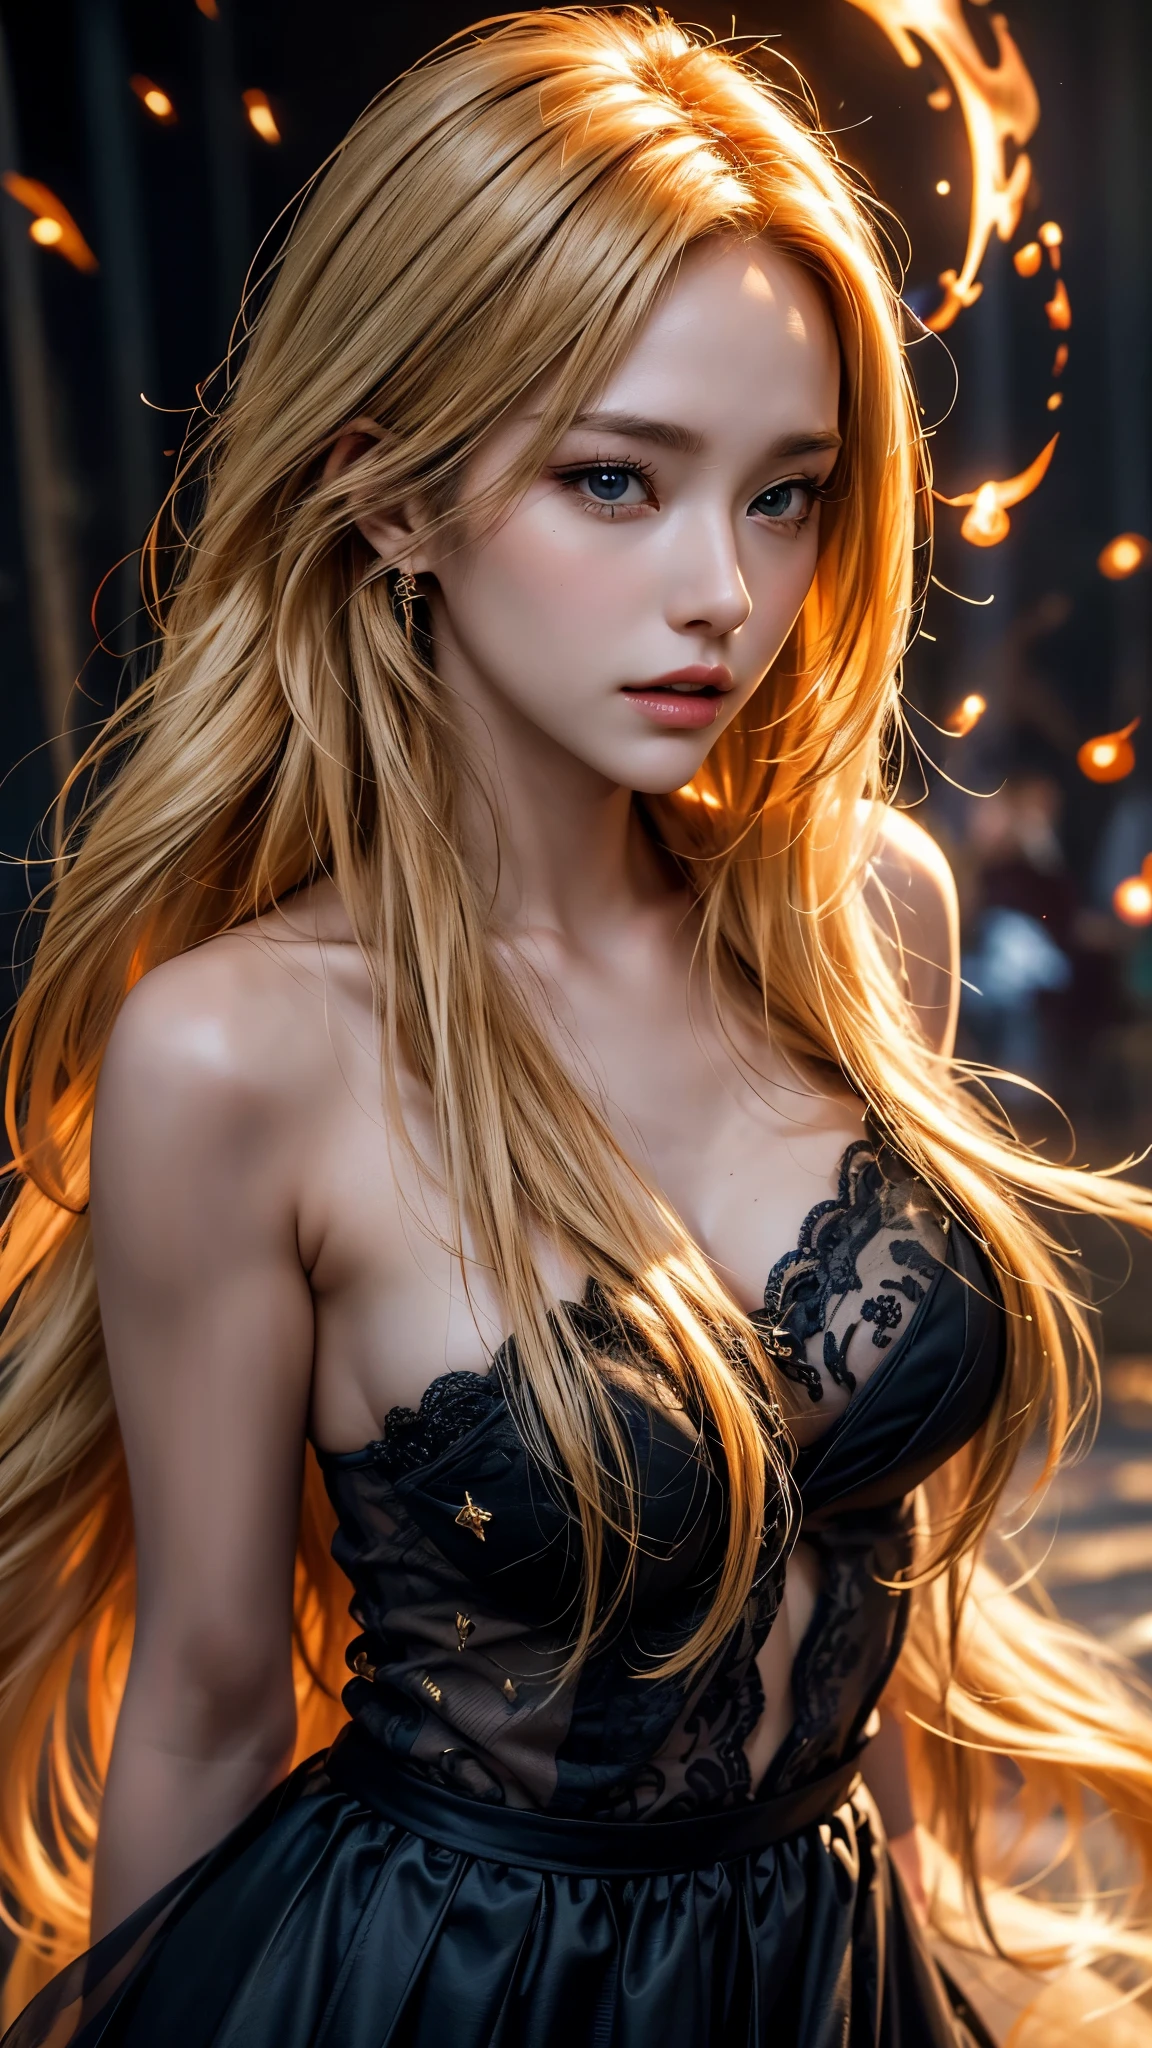 a beautiful woman，With stunning facial features, long golden blonde hair, and a confident expression, Cast powerful fire magic spells, detailed portrait, Practical, photoPractical, best quality, 4k, 8K, High resolution, masterpiece, Extremely detailed, Bright colors, Dramatic Lighting